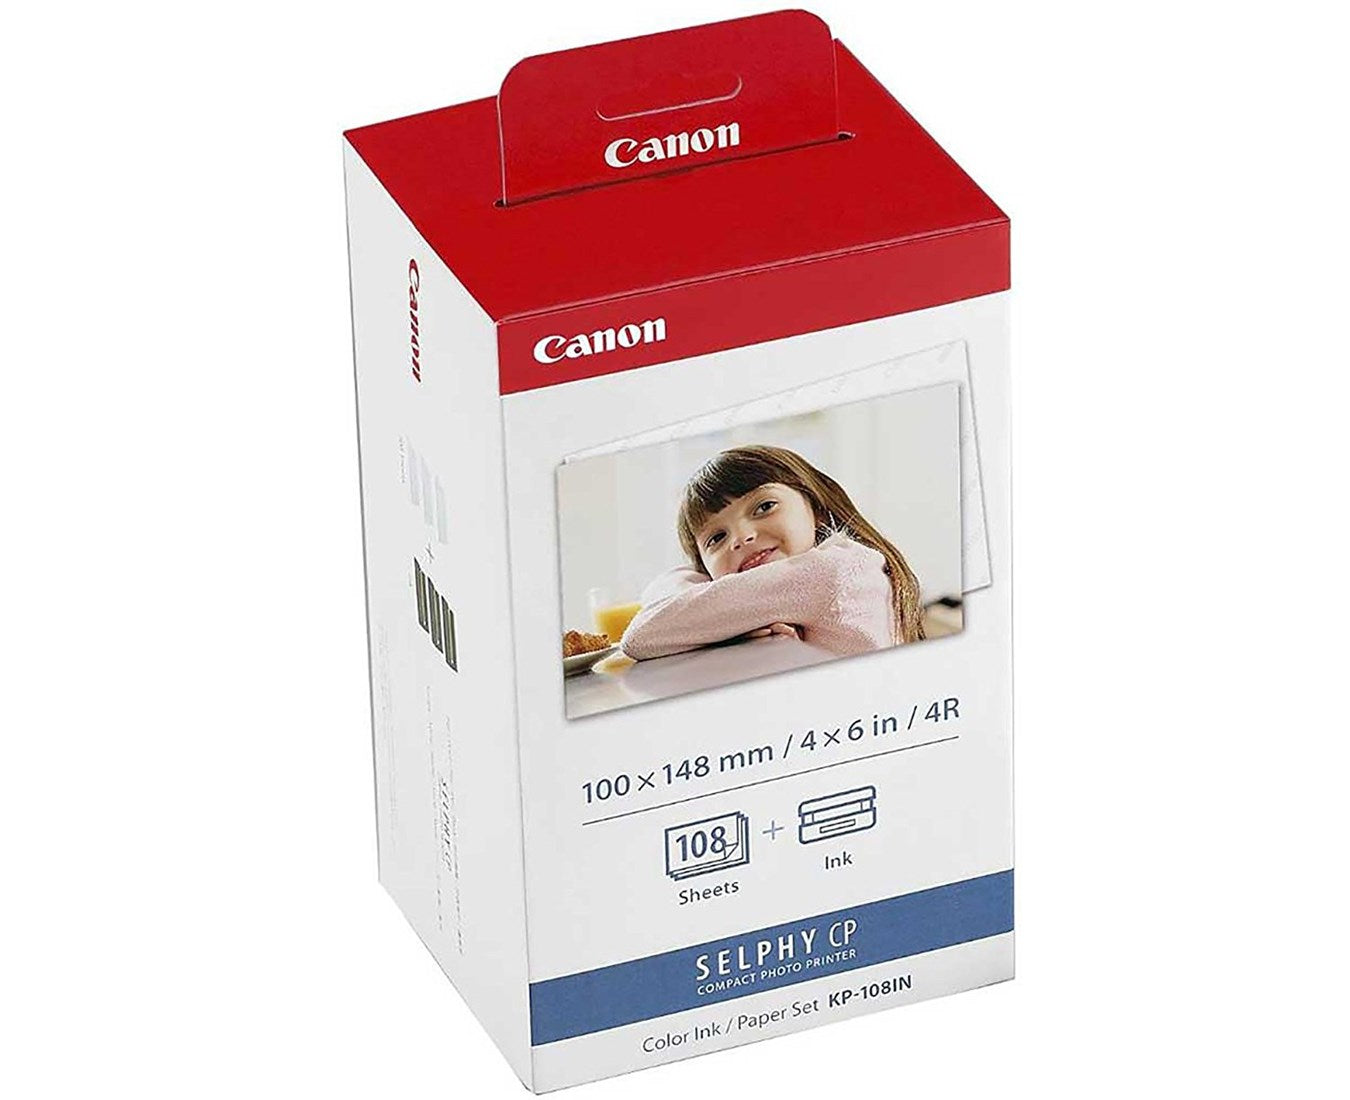 Product Image of Canon KP-108IN Ink & Paper Set for CP Selphy series printer - 2 packs